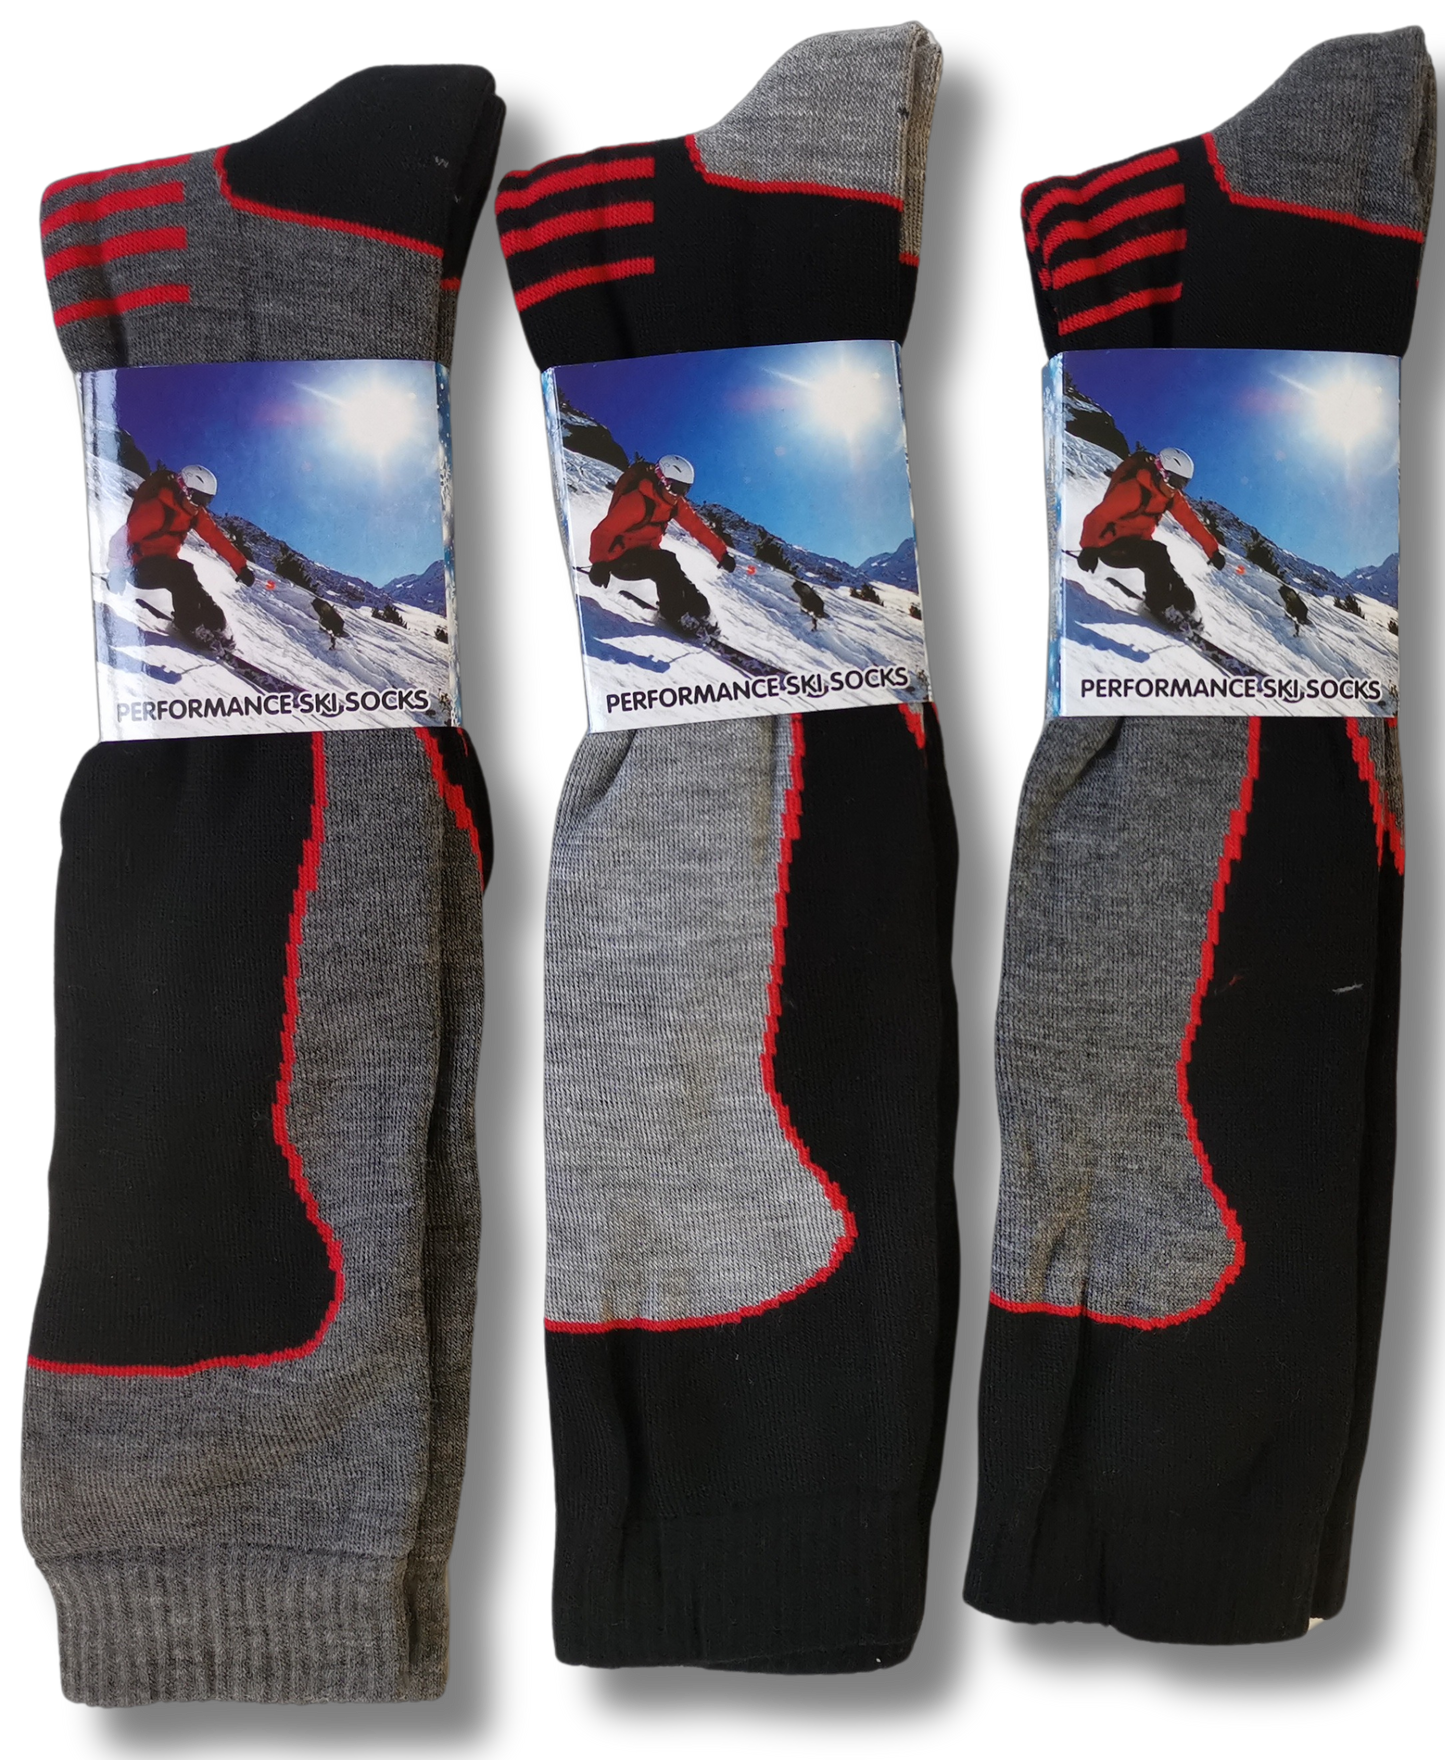 3 Men's Ski Snowboard Sock, Long Thermal Winter Socks, Long Thermal Heat Holding Socks, Outdoor Walking Hiking Durable Knee High, Black Grey Red. Buy now for £8.00. A Socks by Sock Stack. 6-11, acrylic, assorted, black, black socks, boot, boot socks, boys